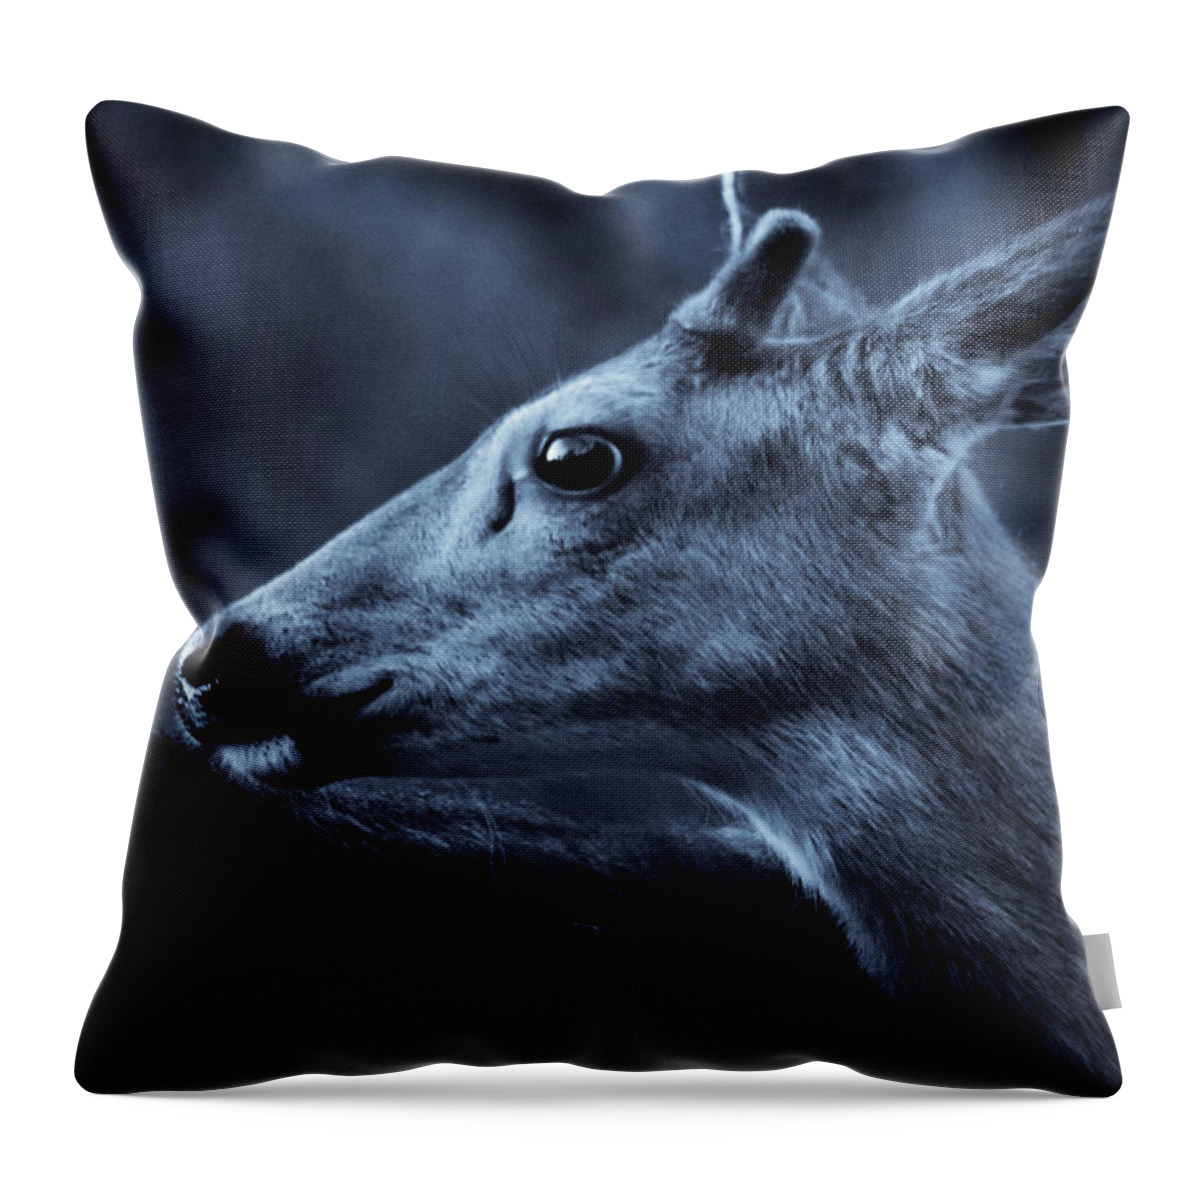 Deer Throw Pillow featuring the photograph Curious by Adria Trail